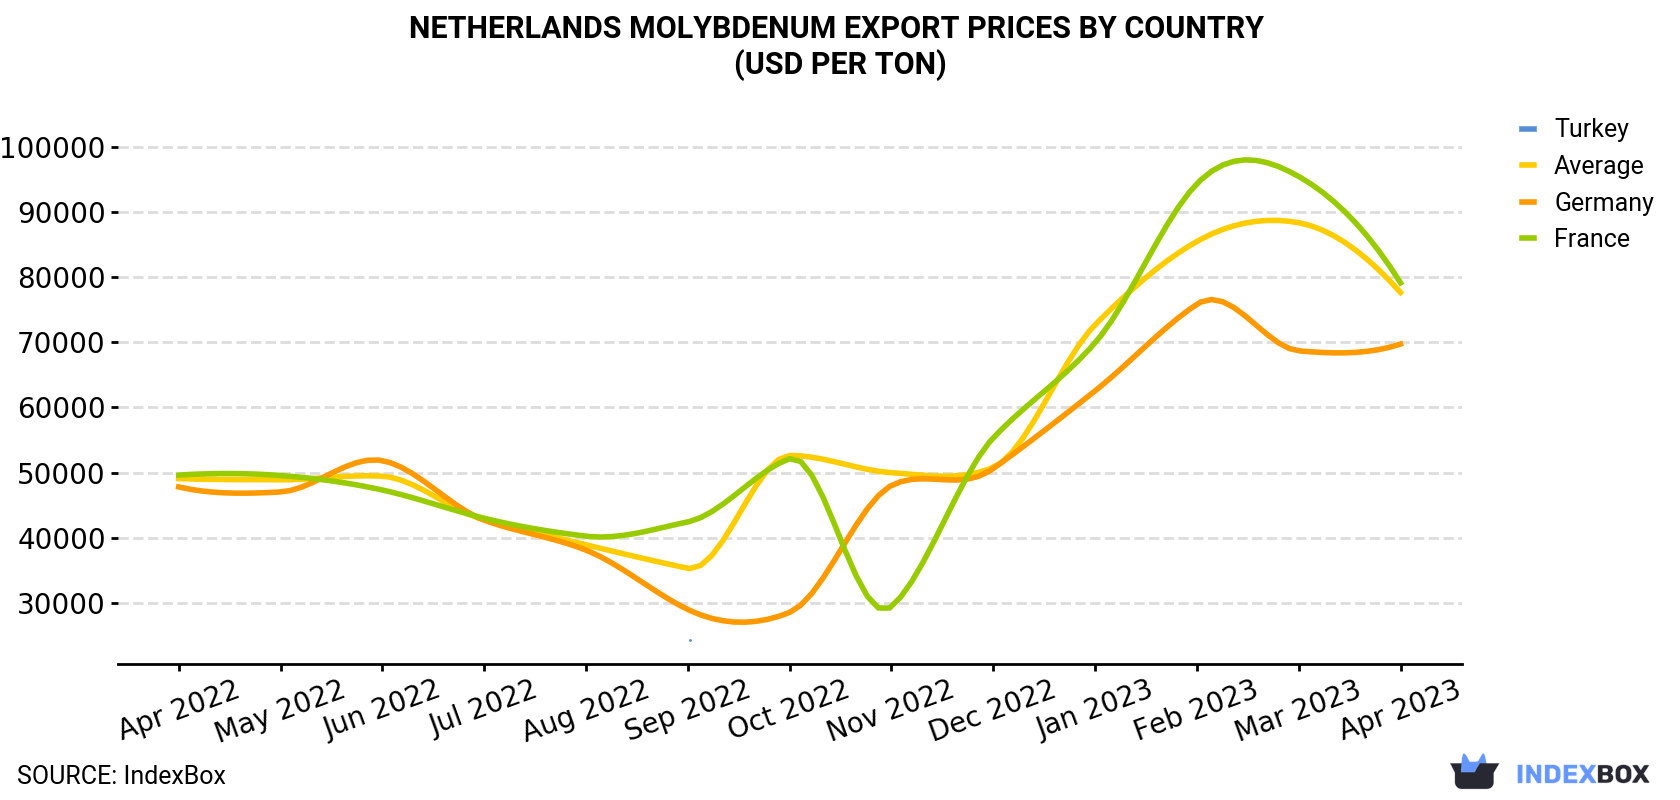 Netherlands Molybdenum Export Prices By Country (USD Per Ton)